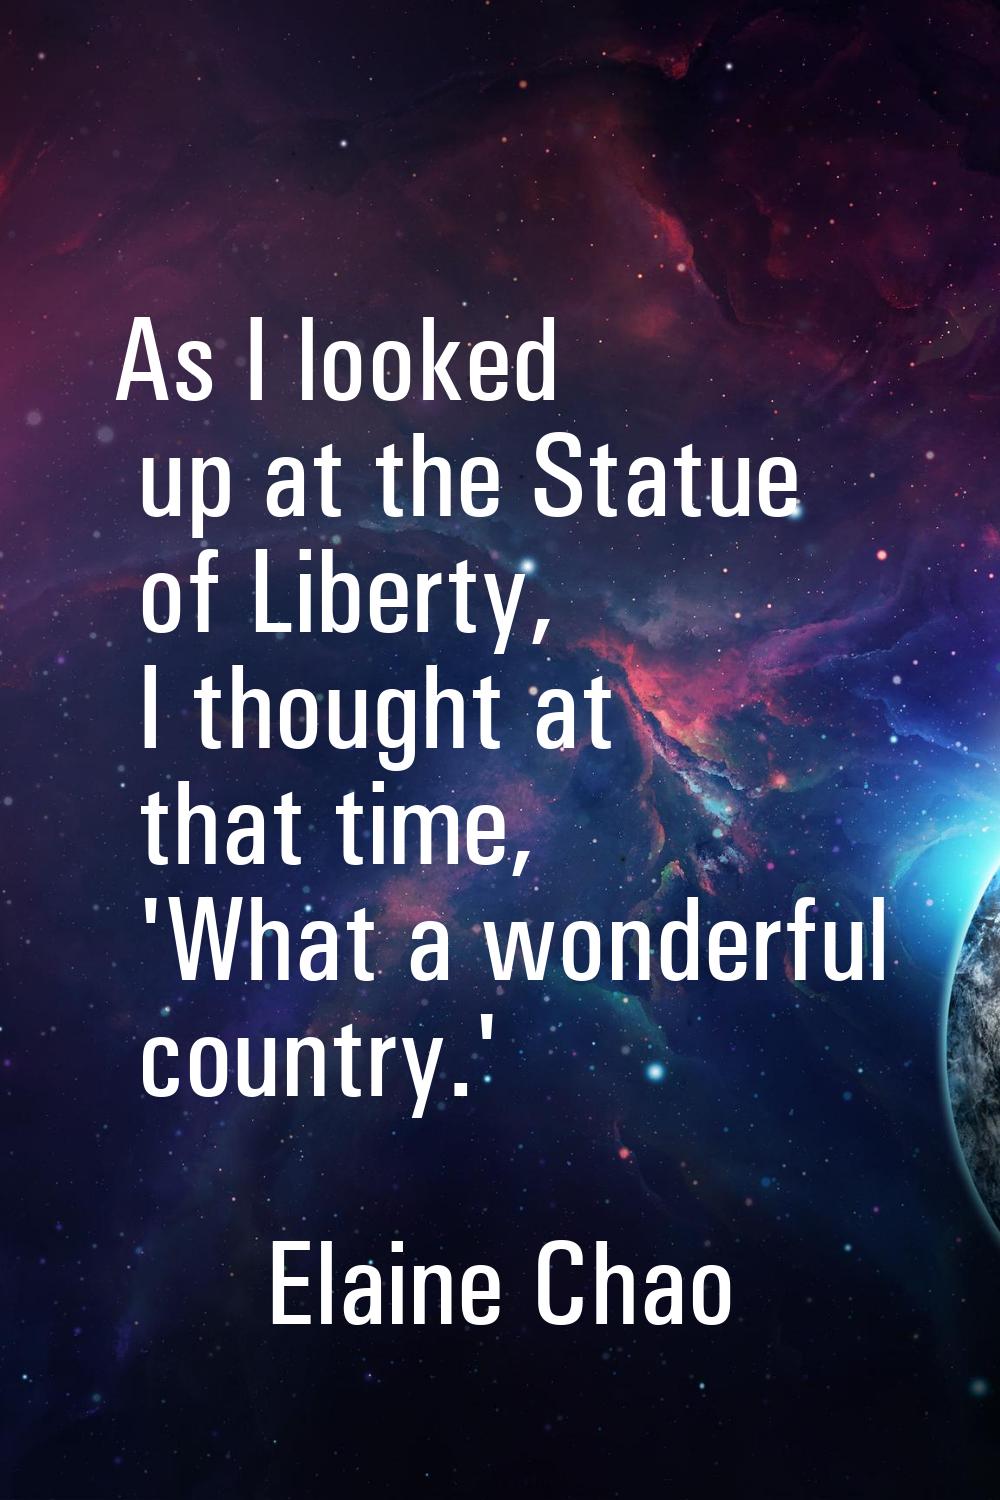 As I looked up at the Statue of Liberty, I thought at that time, 'What a wonderful country.'